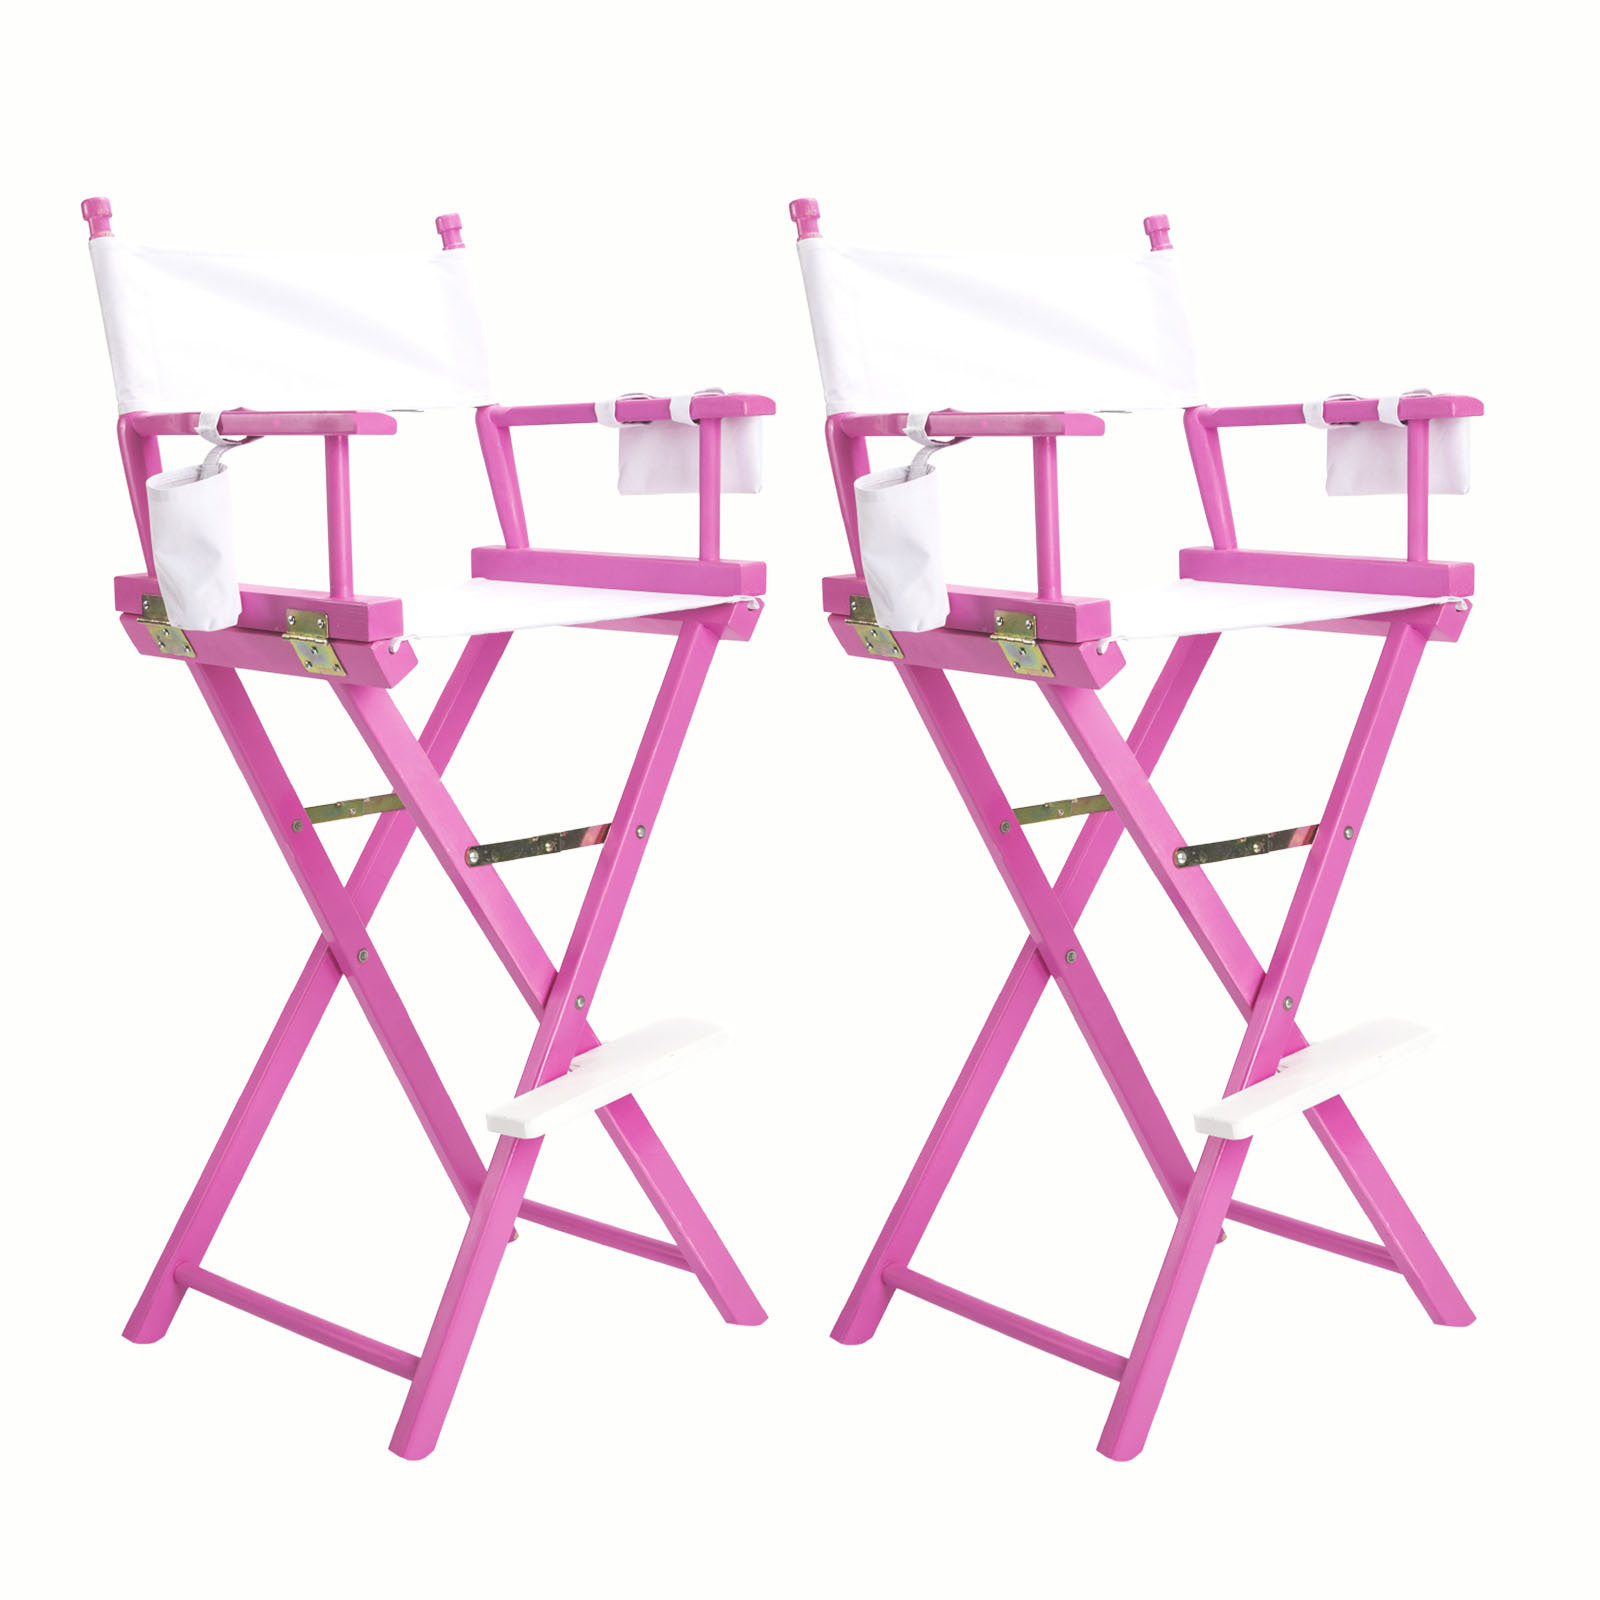 2X 77cm Tall Director Chair - PINK HUMOR